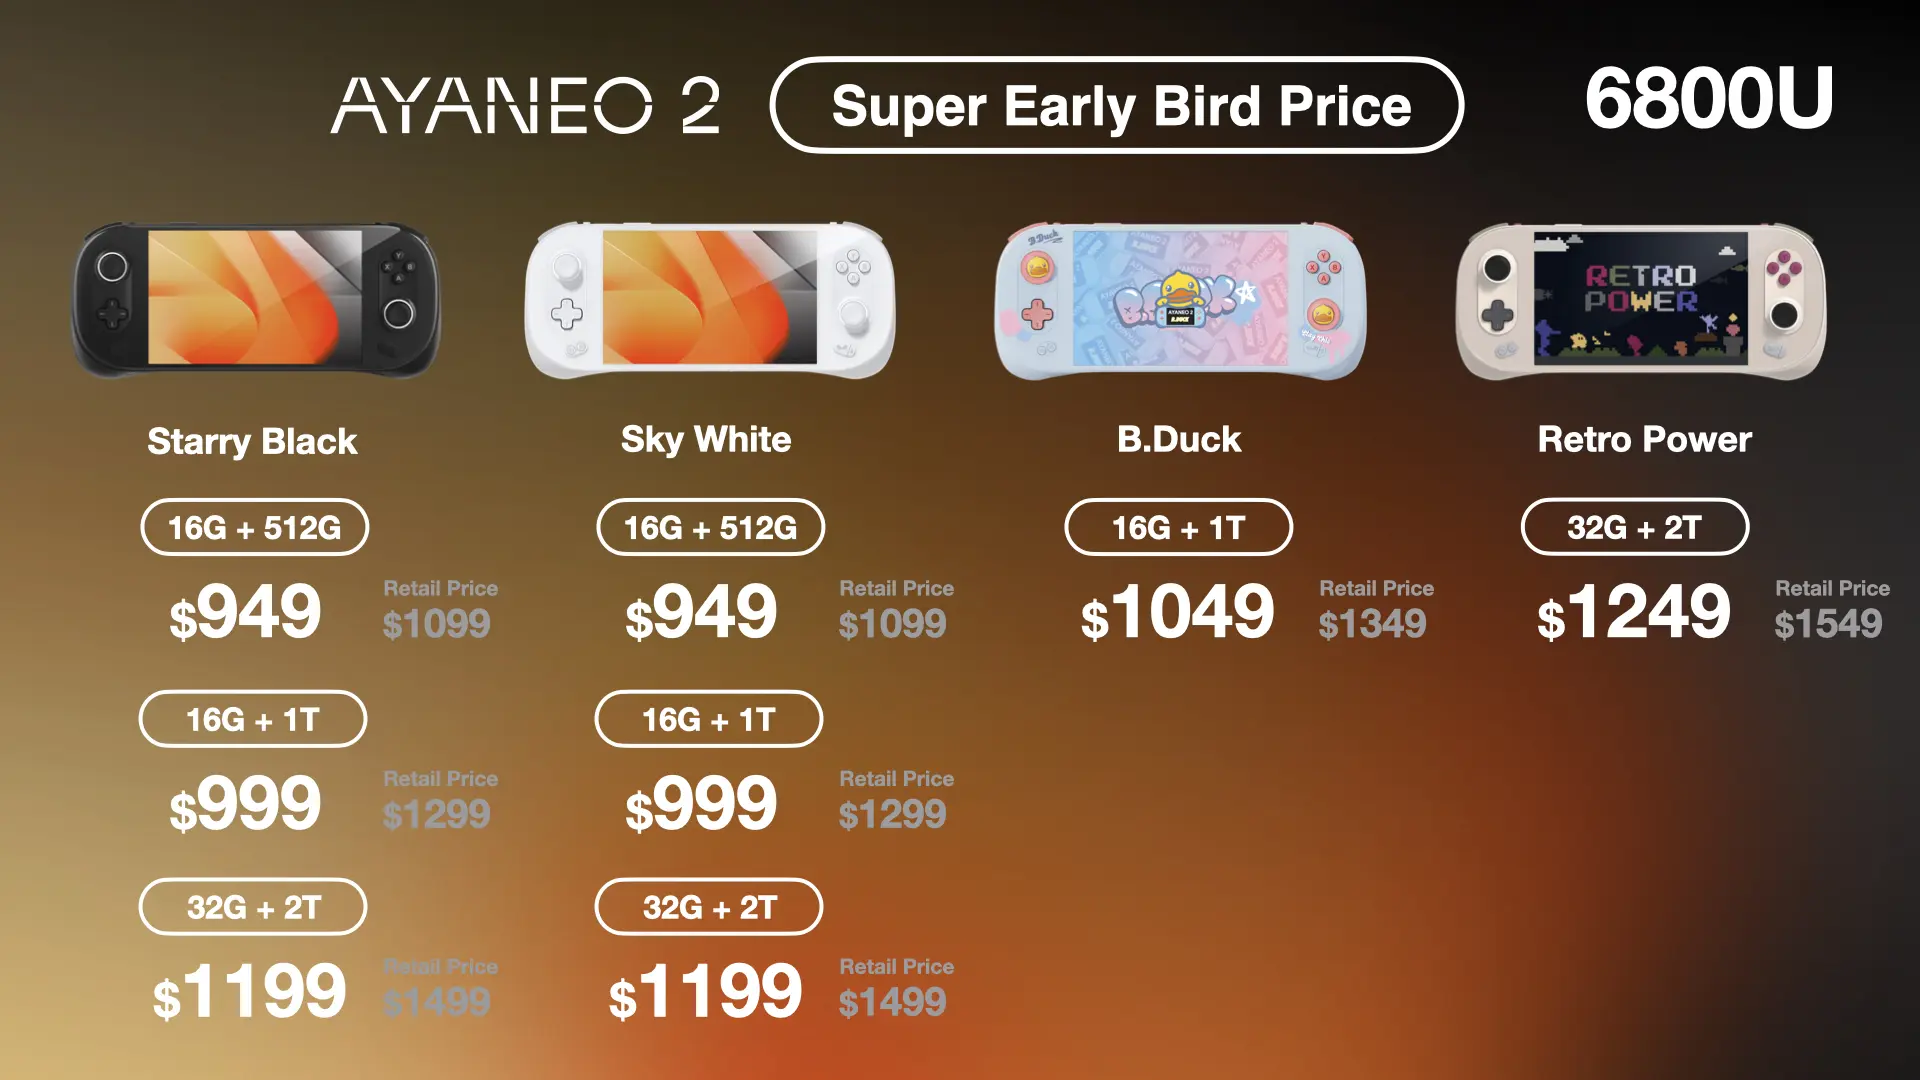 The product line-up for the AYANEO 2